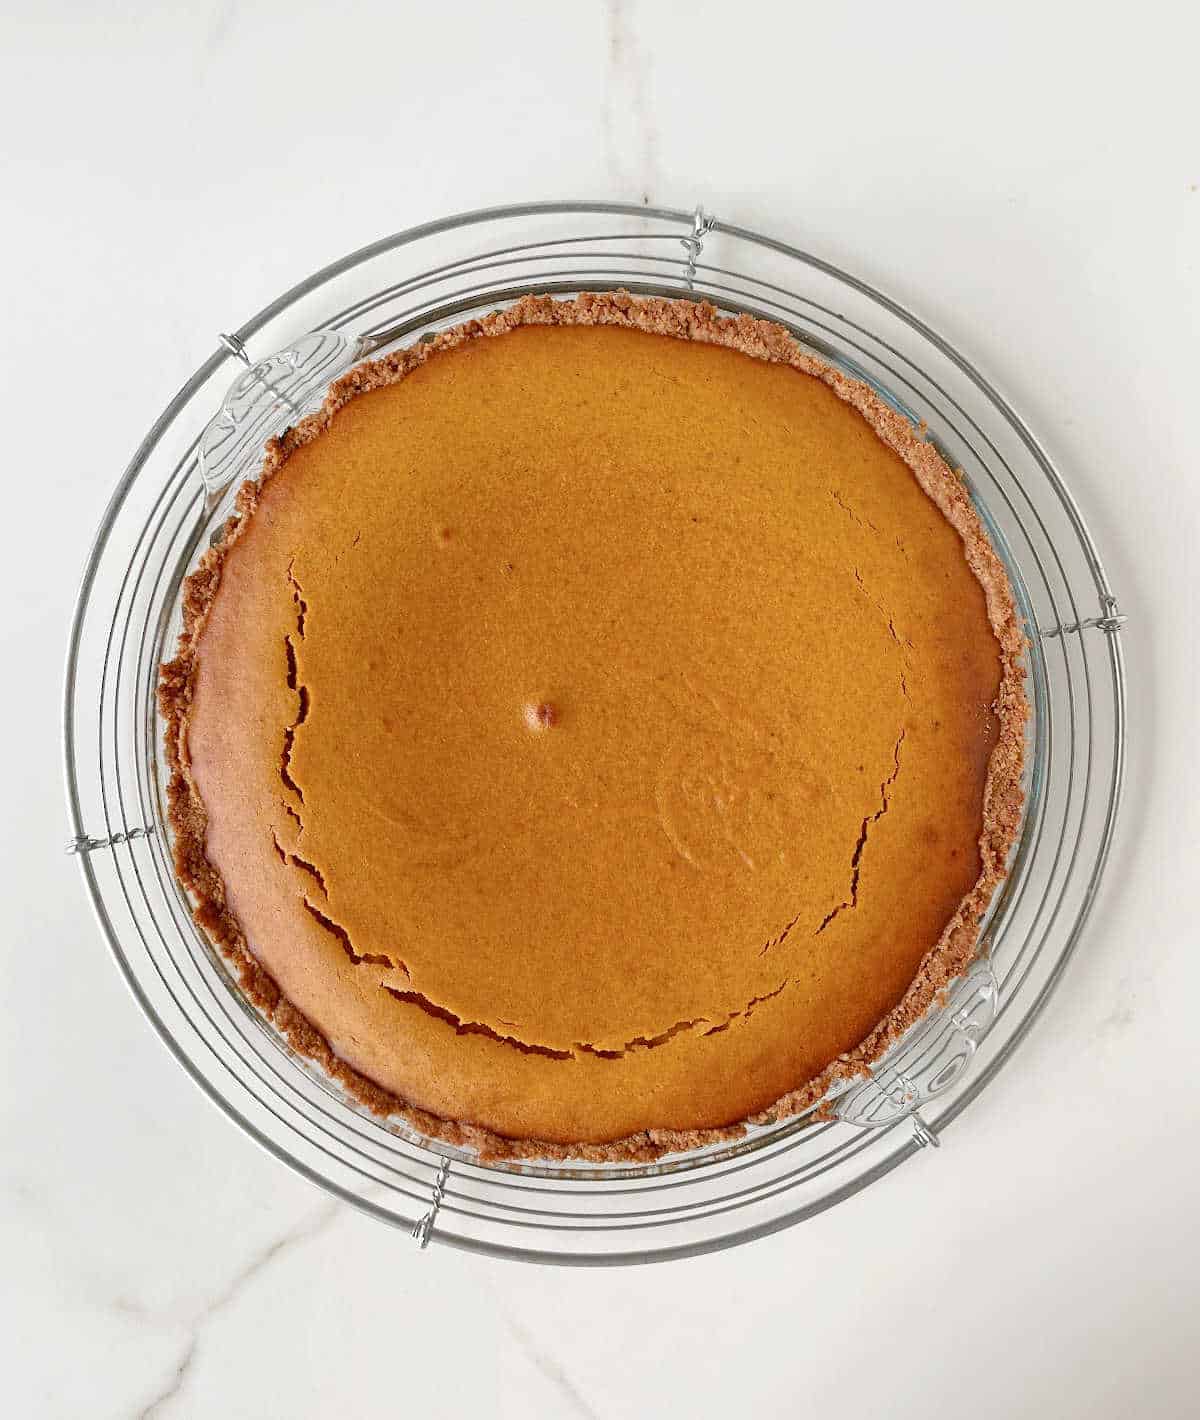 Baked pumpkin pie on a glass plate on a wire rack. Top view on white marble surface.